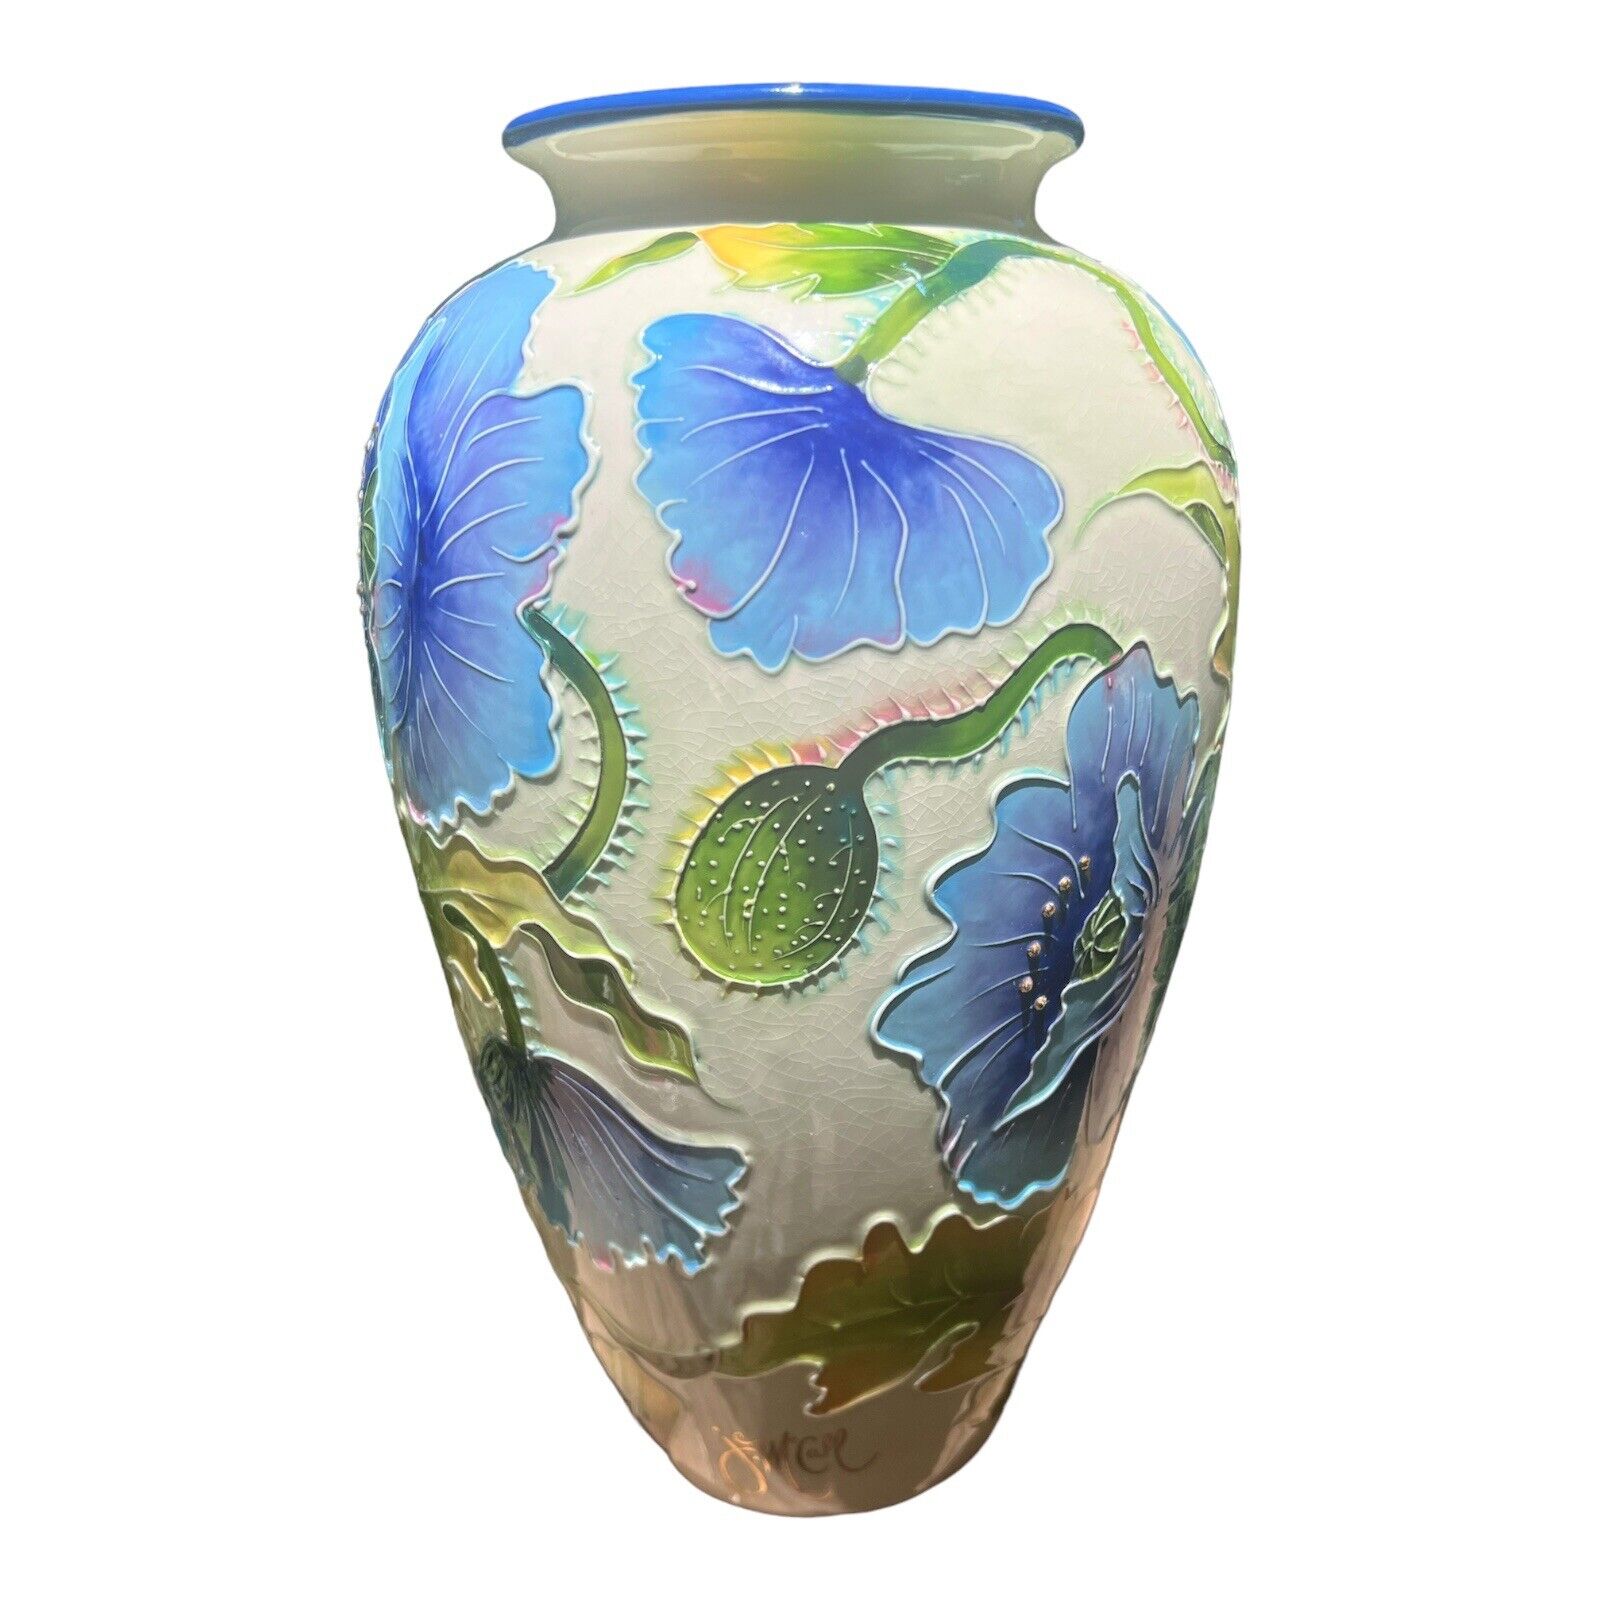 2004 Blue Skies Icing on the Cake Blue Poppy Vase J McCall Raised Relief Details